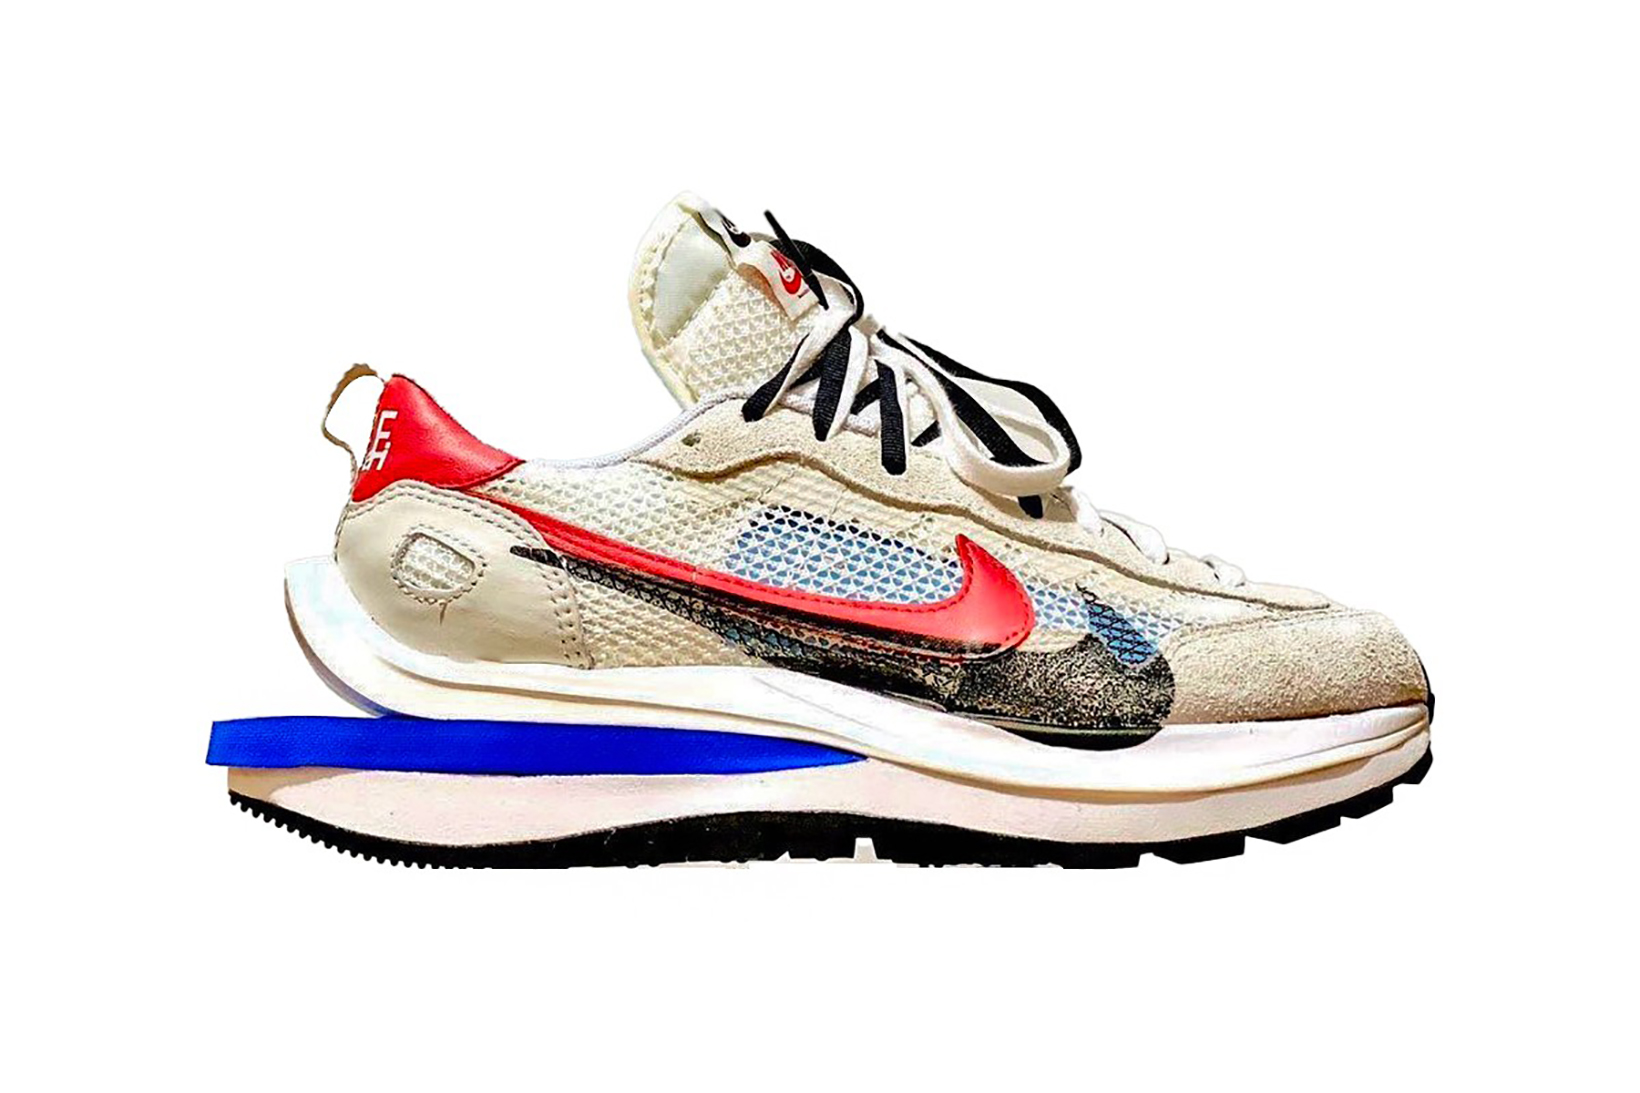 Add this Sacai X Nike collab to your summer sneaker rotation